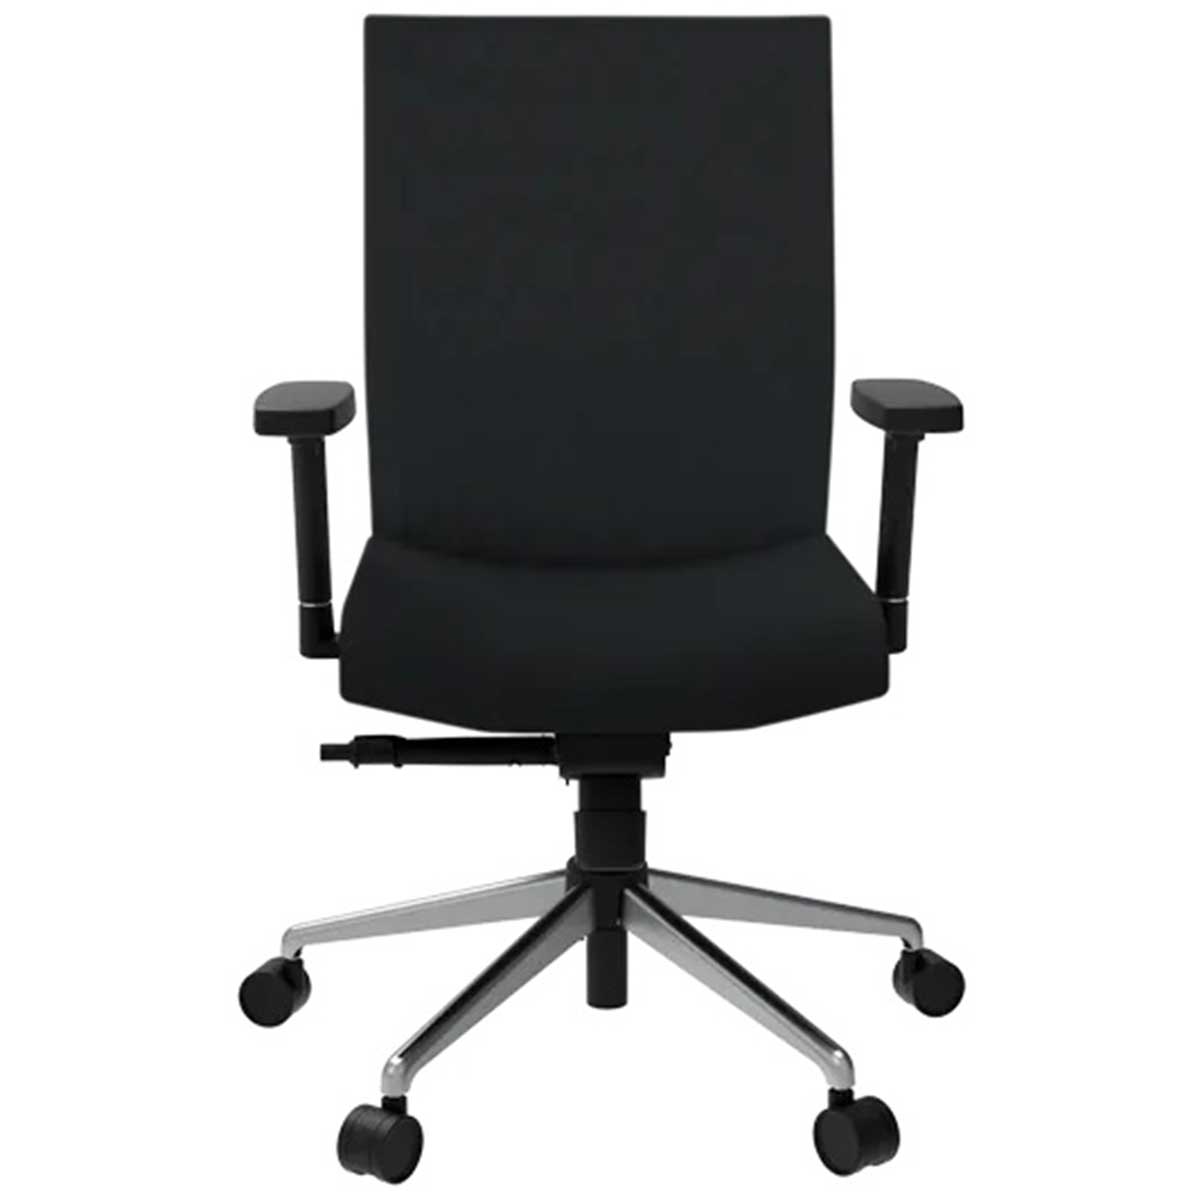 Staff Chair Manufacturers, Suppliers, Exporters in Delhi 